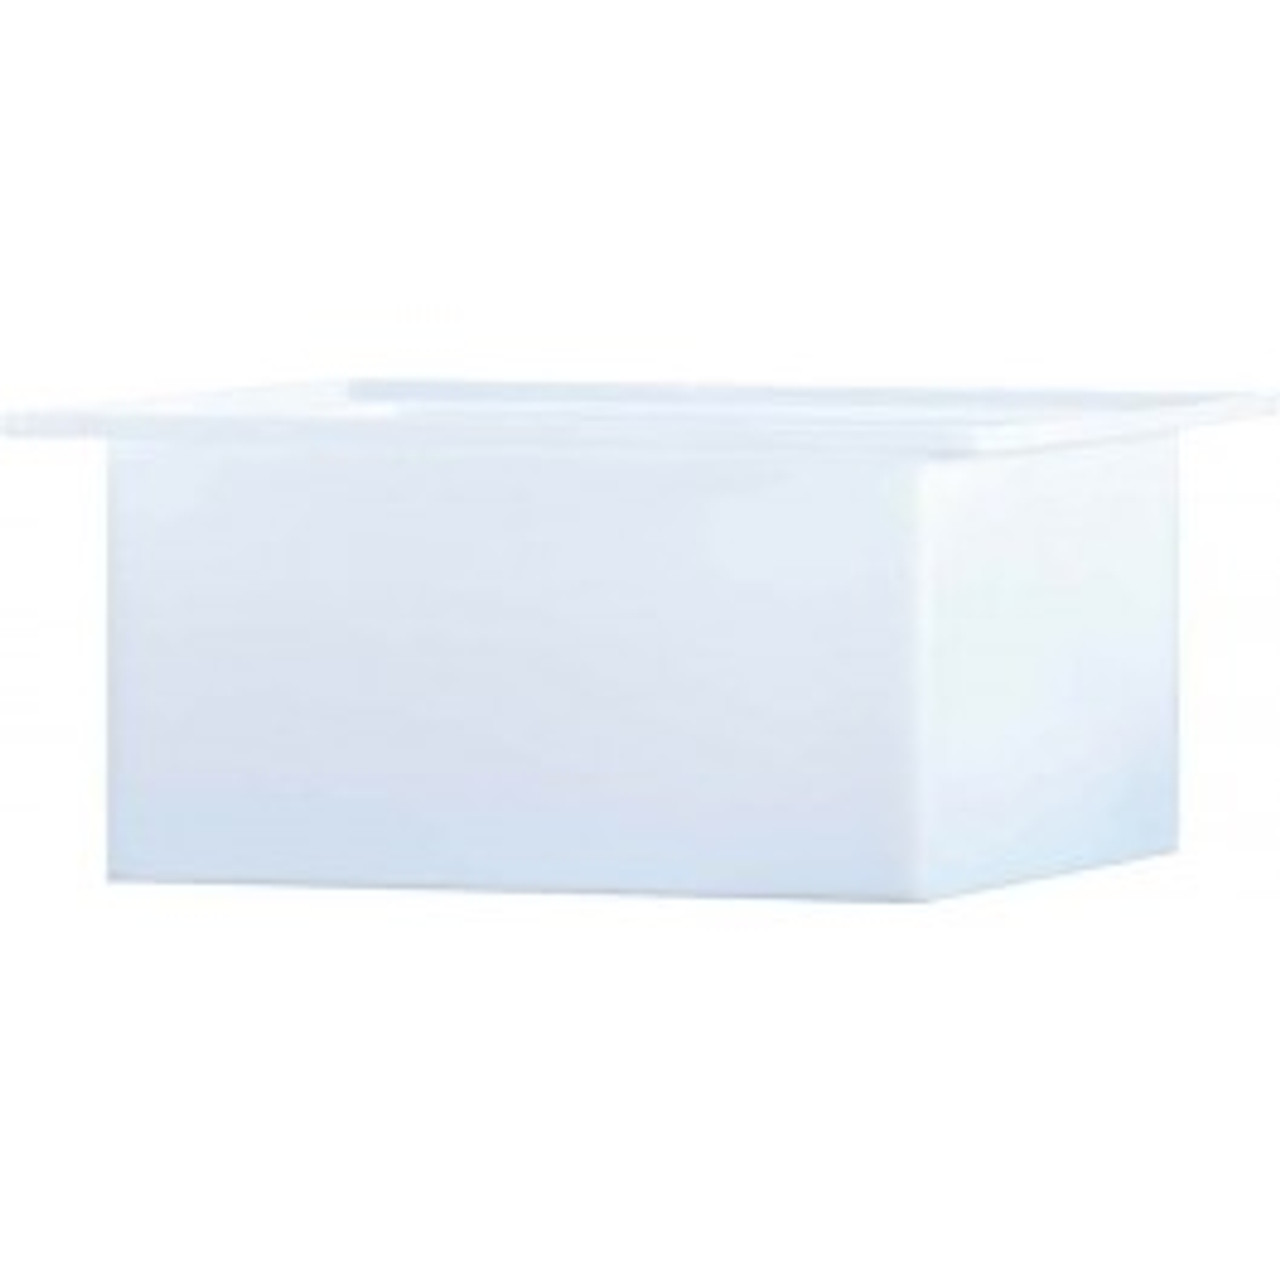 An image of a 50 Gallon PE Chem-Tainer White Rectangular Open Top Tank | R183618A